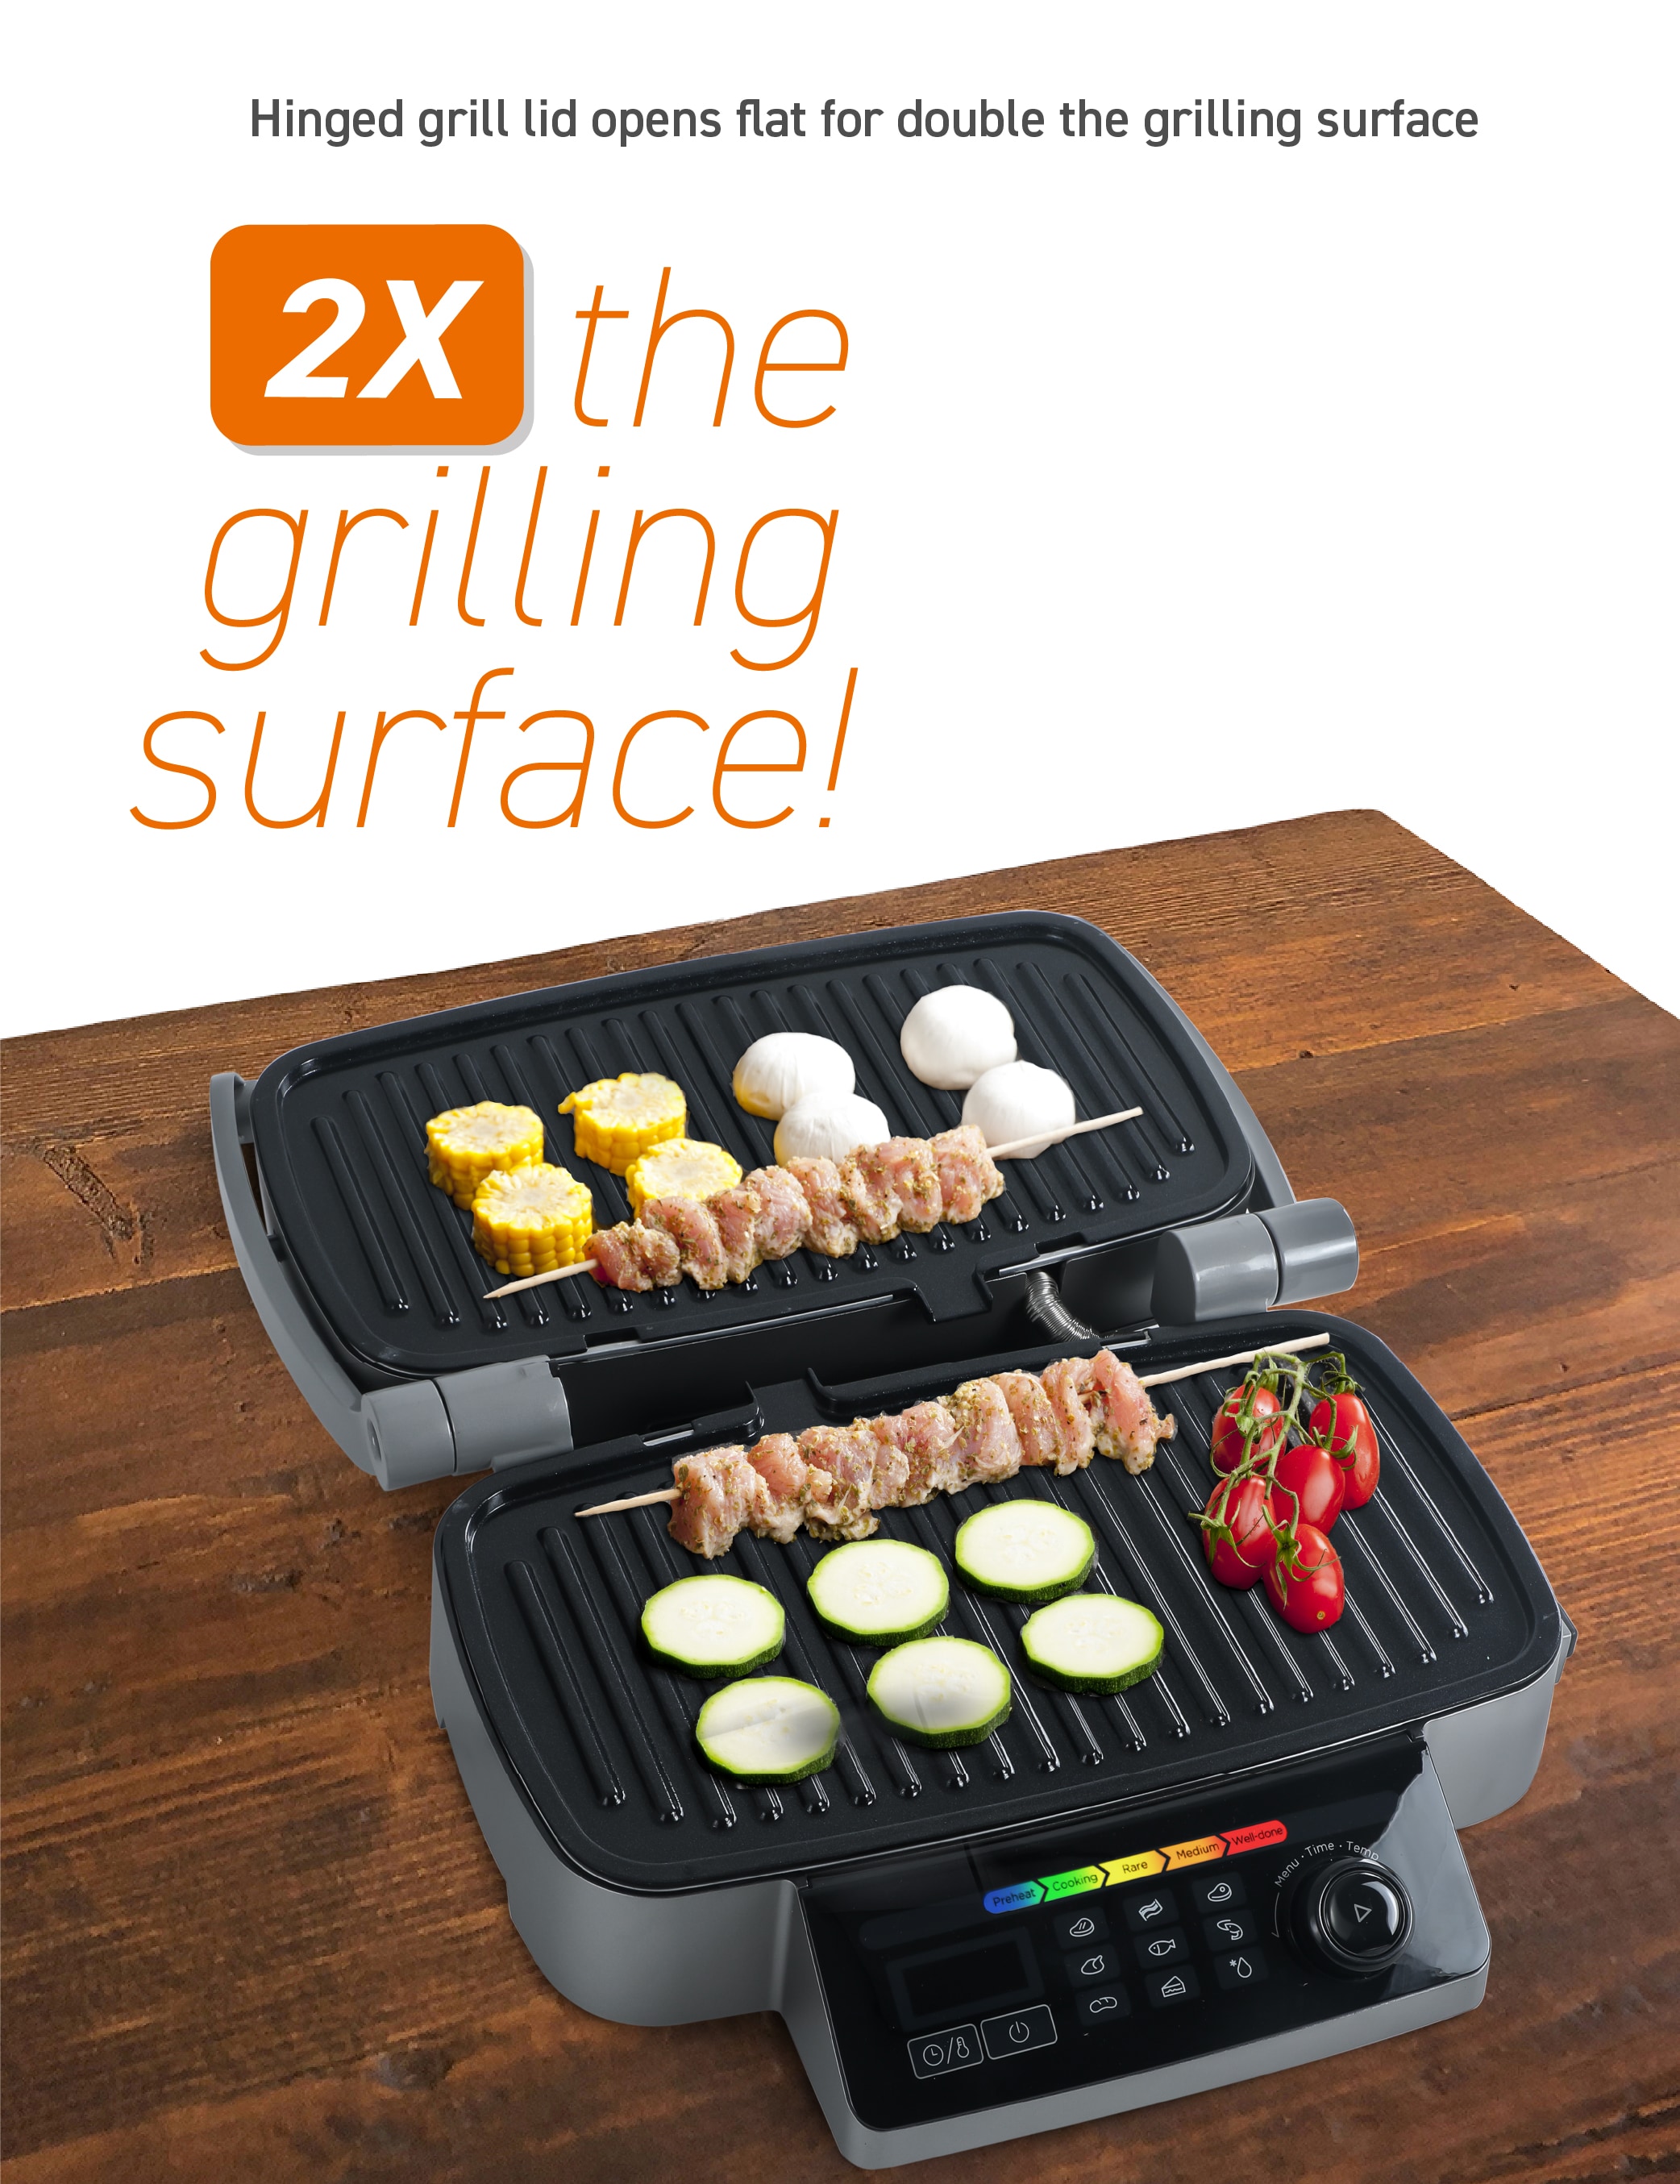 Hamilton Beach 3-in-1 Indoor Grill and Electric Griddle, Grill and Bacon  Cooker Combo, Opens 180 Degrees to Double Cooking Space, Removable Nonstick